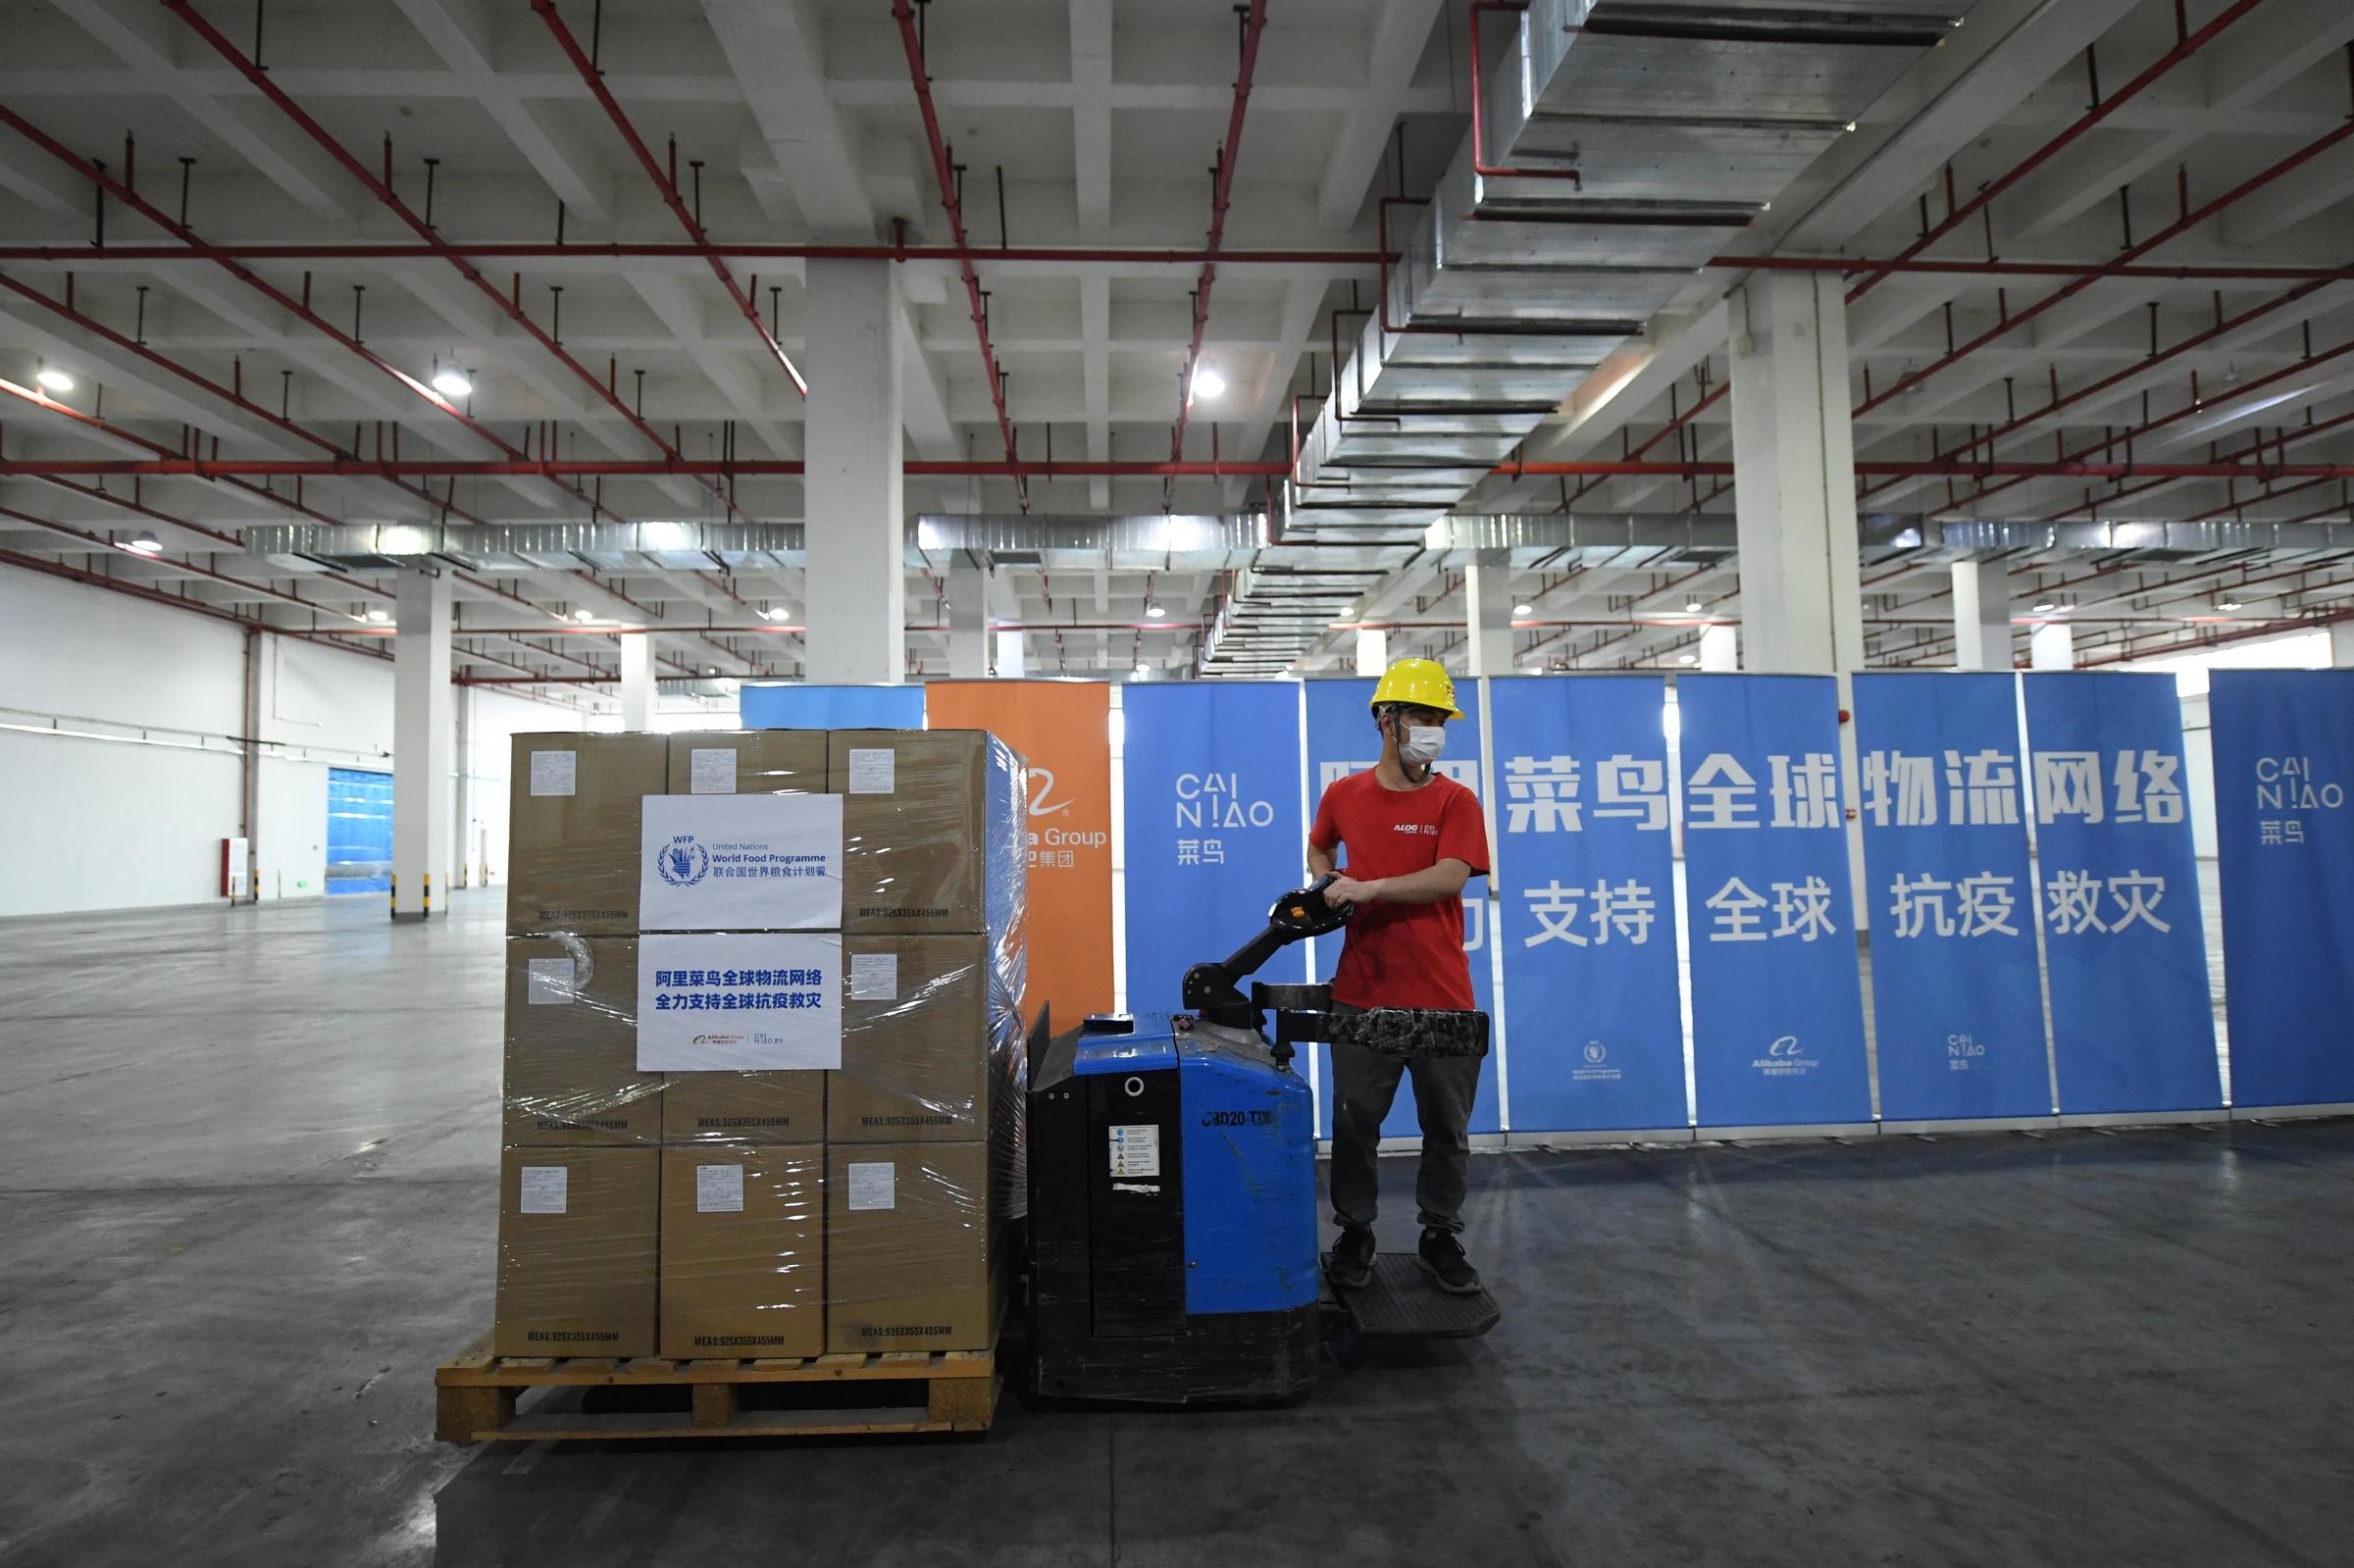 World Food Programme's Anti-epidemic Supplies Arrive At Cainiao Warehouse In Guangzhou